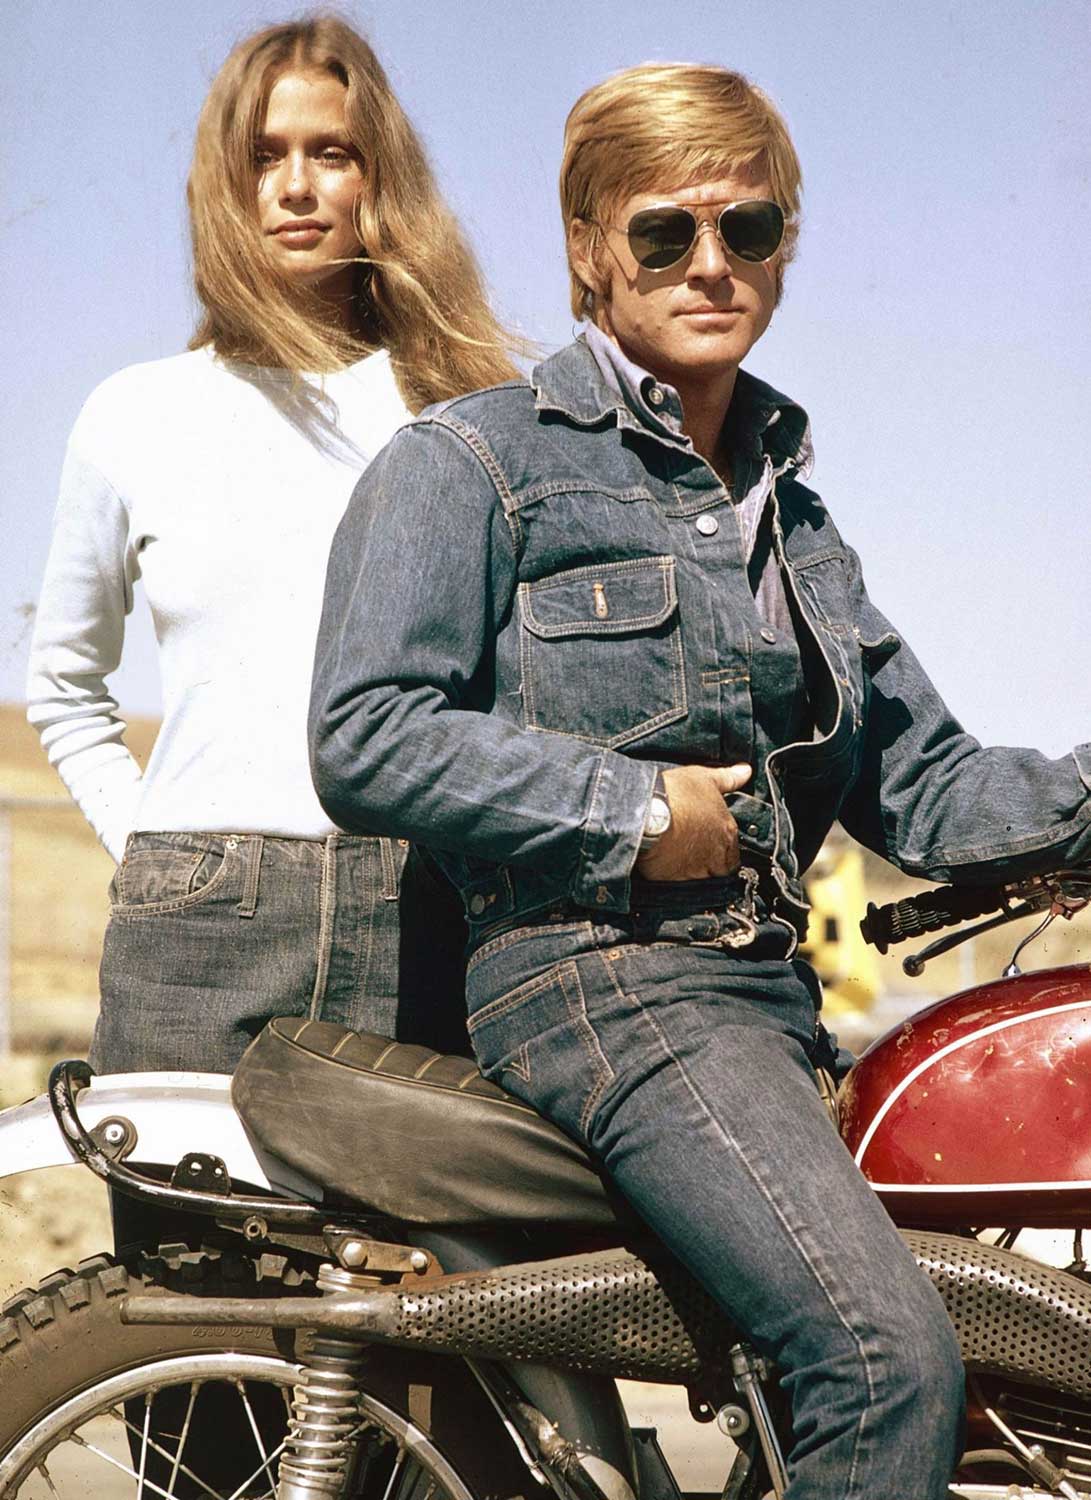 Robert Redford wearing a Canadian Tuxedo on a motorcycle